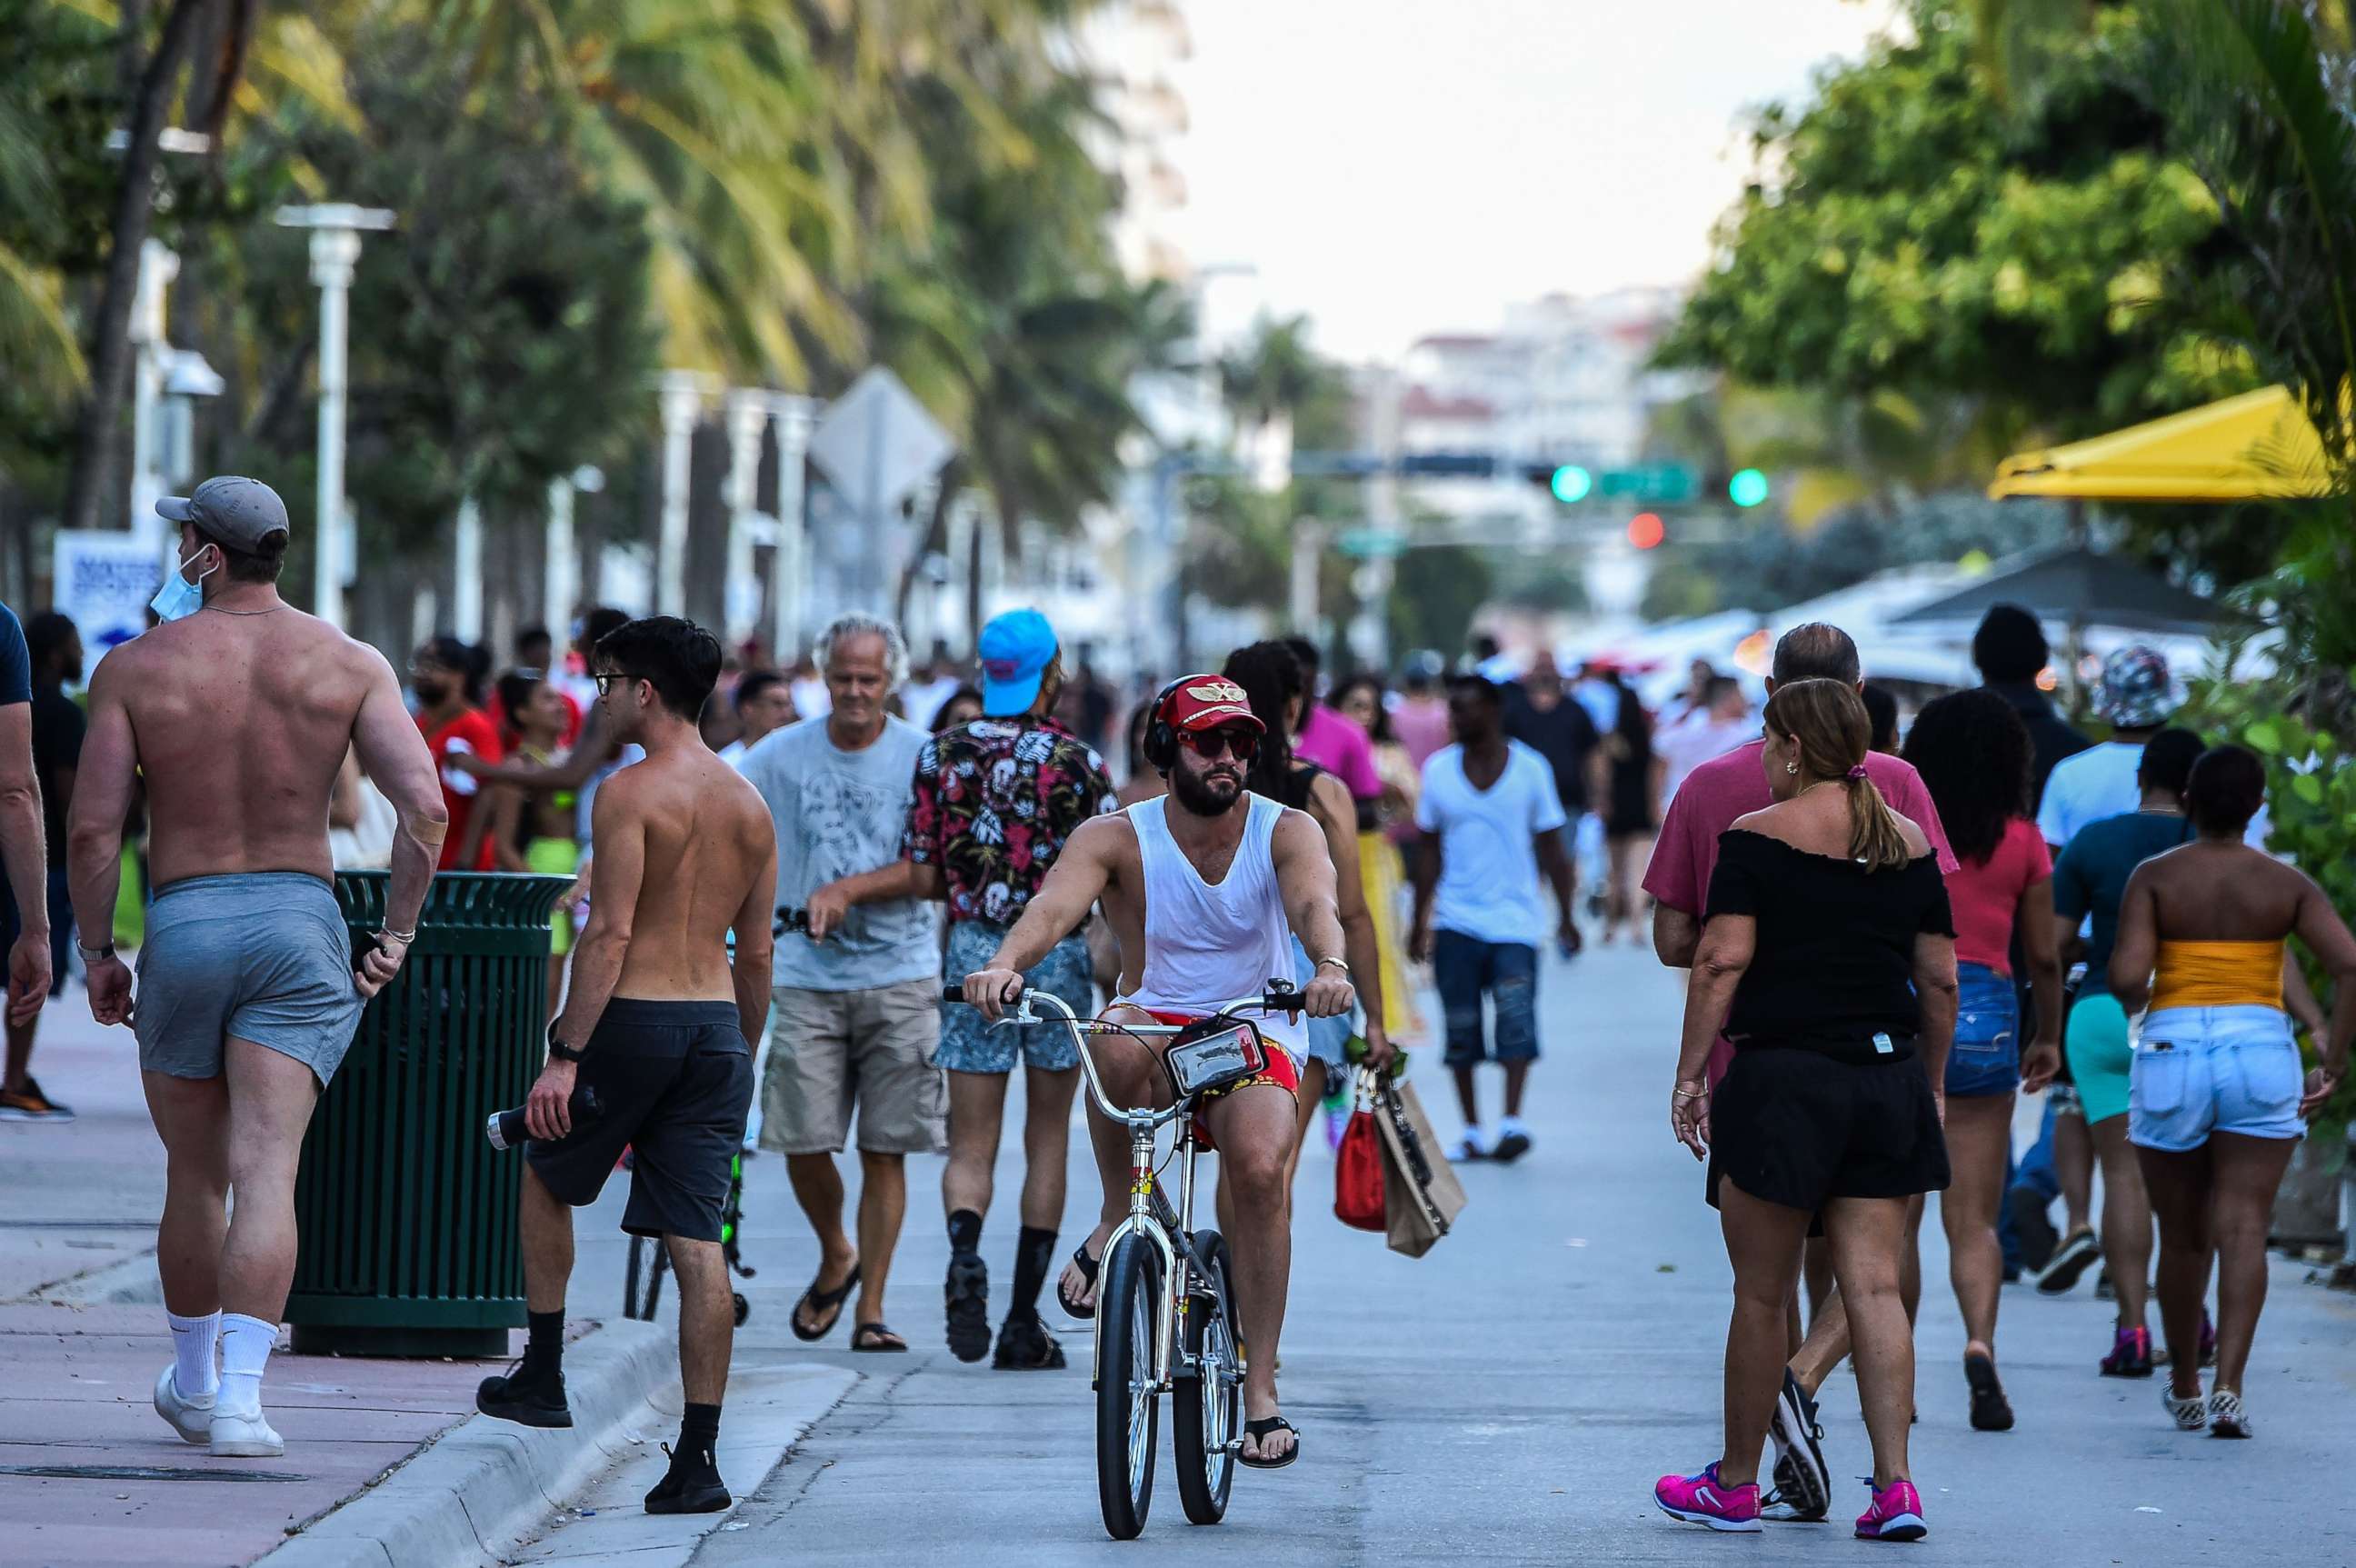 PHOTO: A man rides a bicycle as people walk on Ocean Drive in Miami Beach, Florida on June 26, 2020.